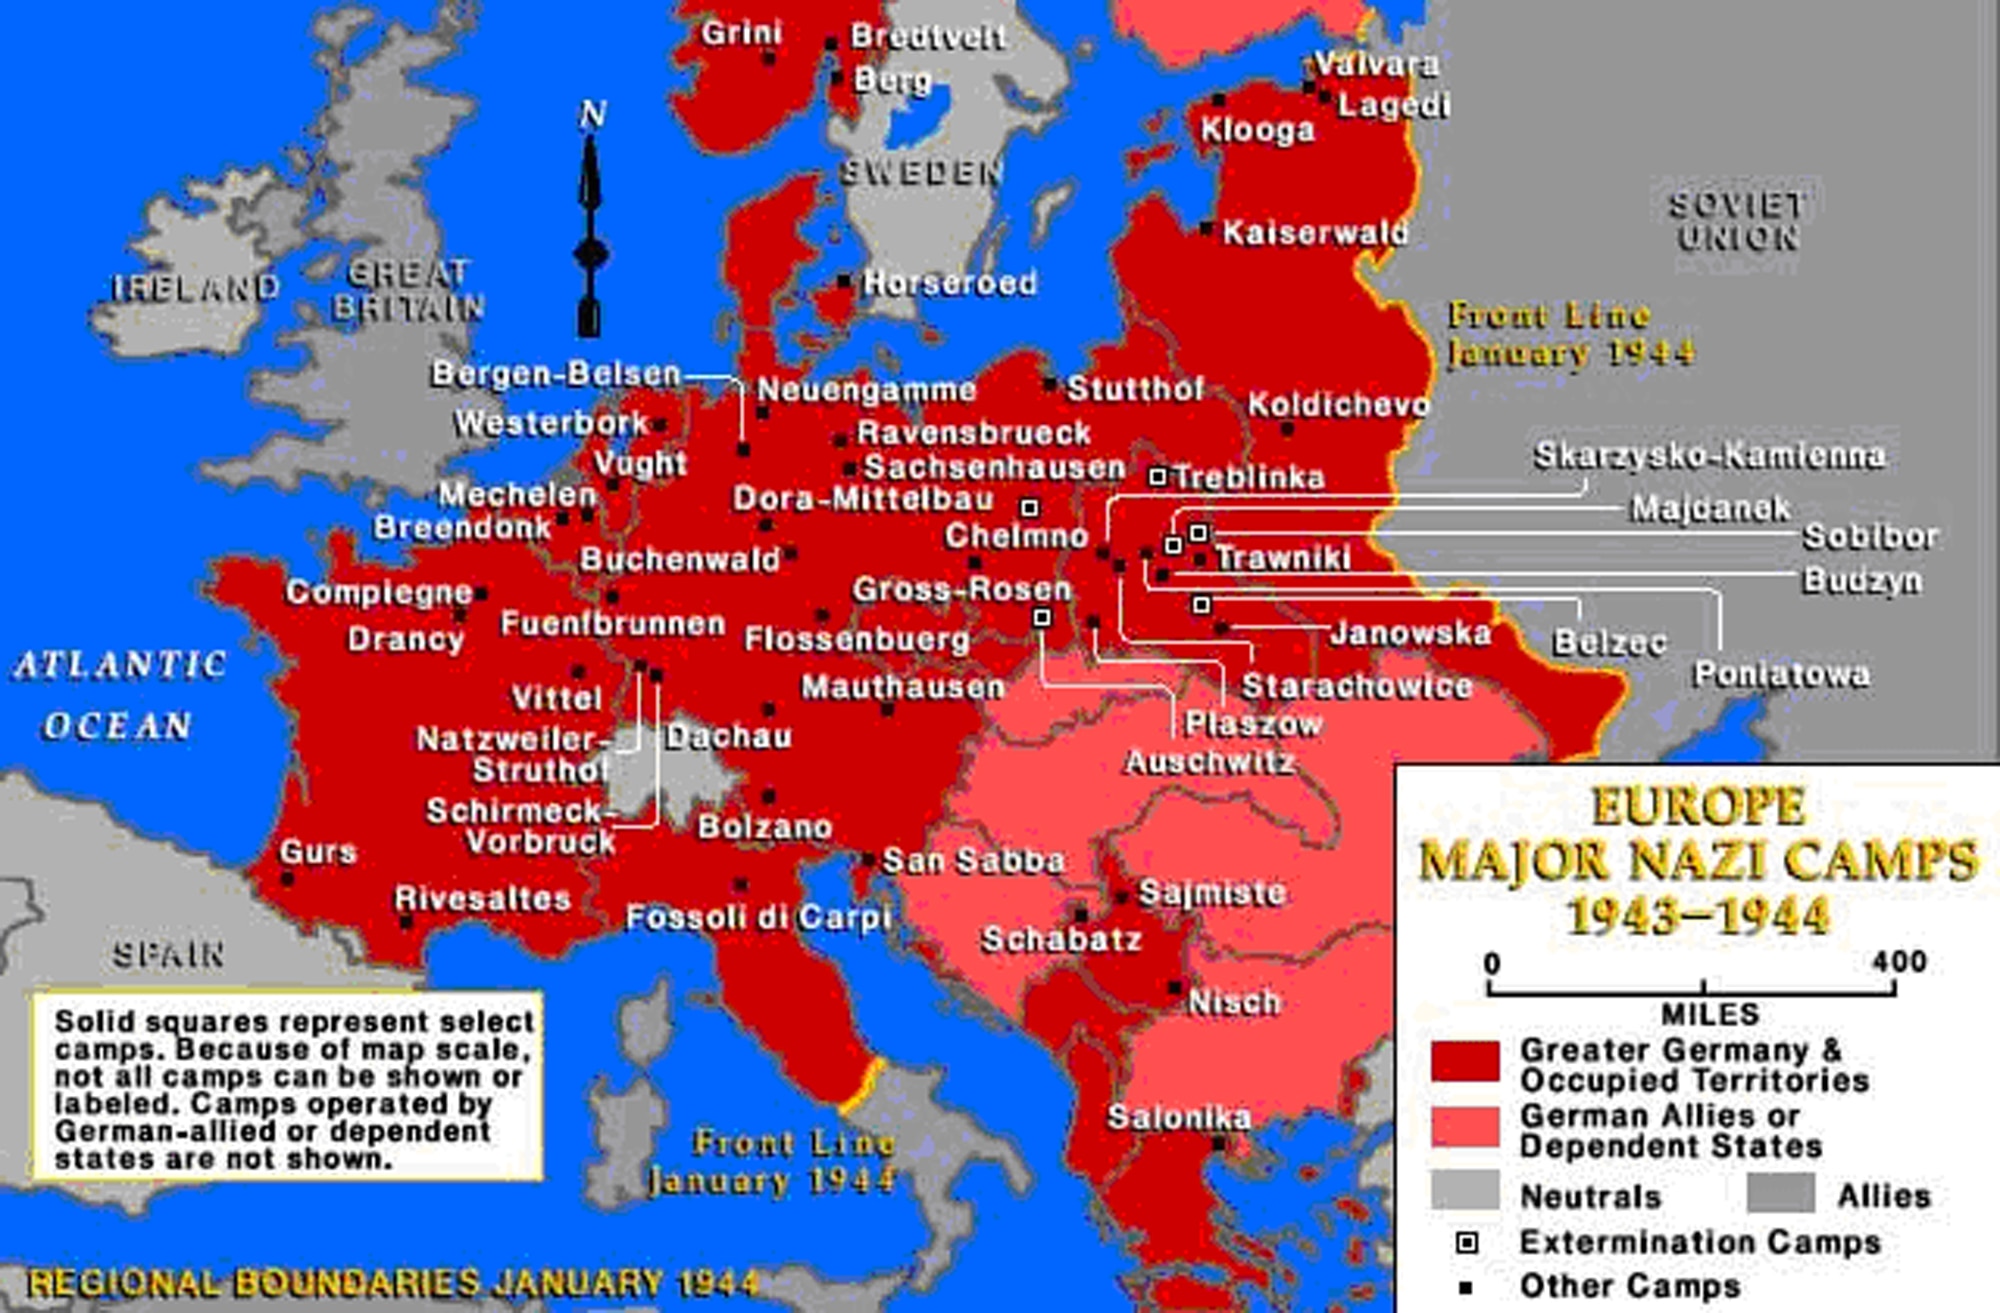 This shows the location of the major Nazi camps established between 1941 and 1943 .